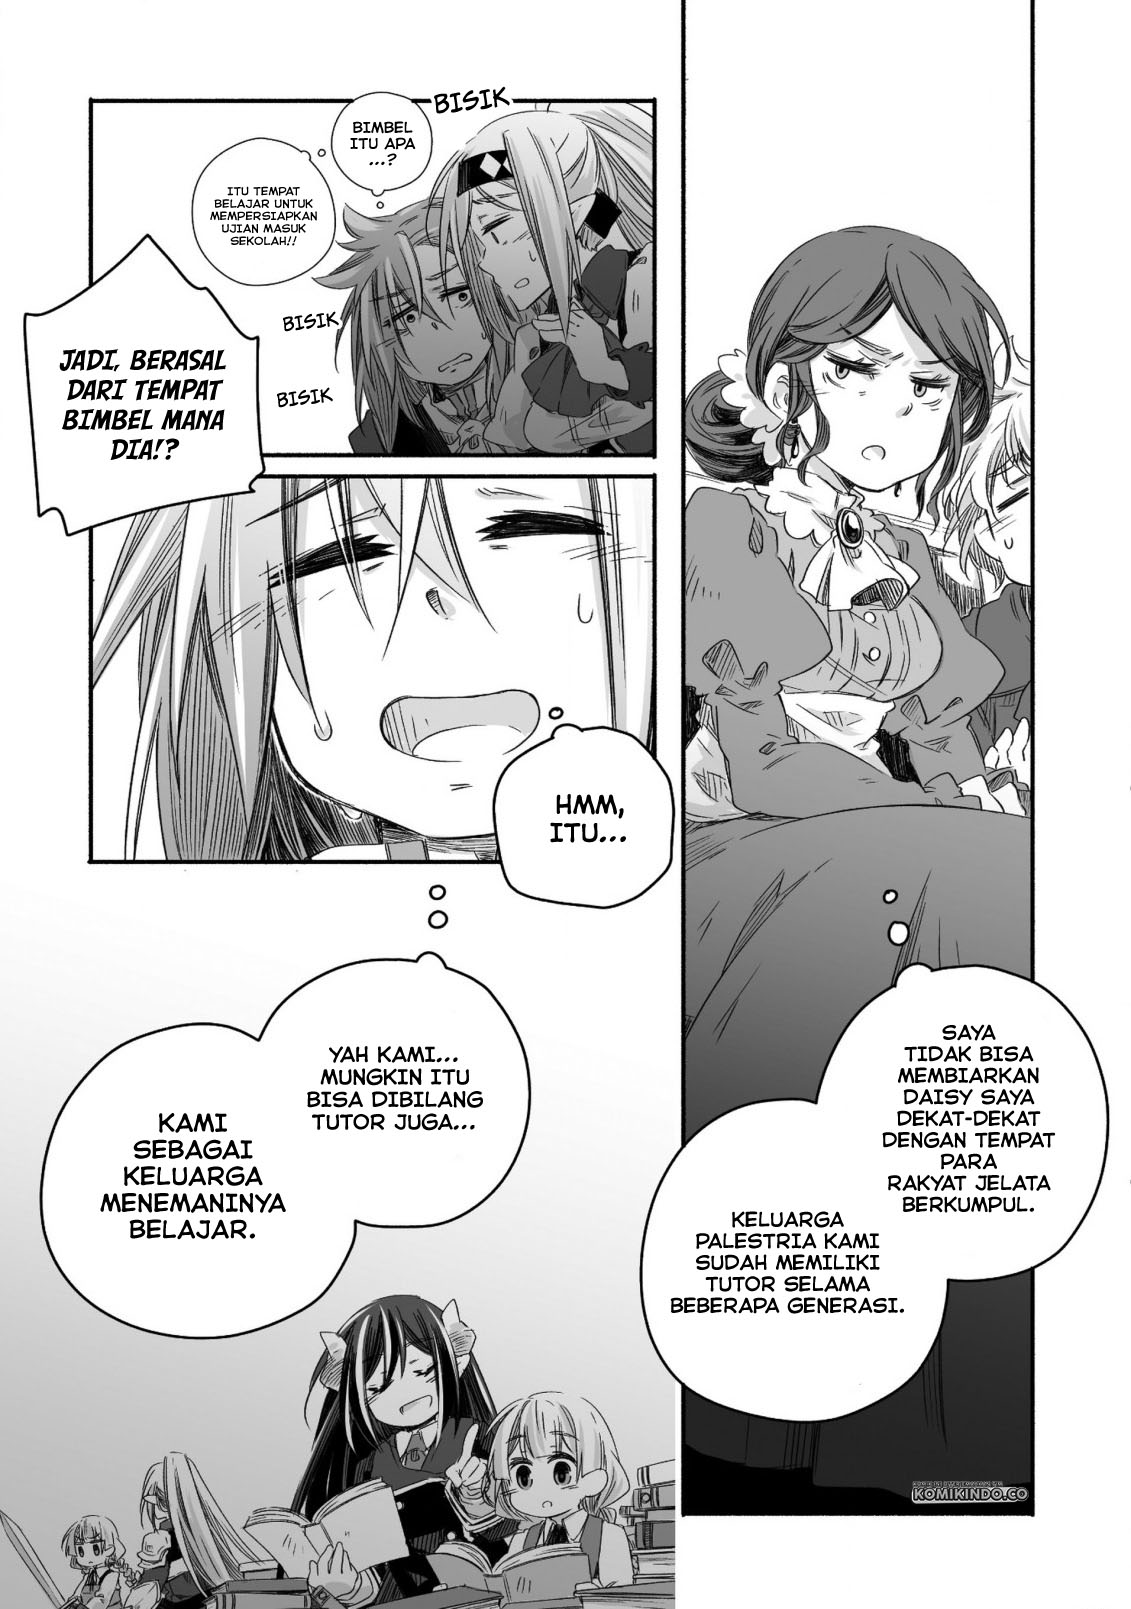 Parenting diary of the strongest dragon who suddenly became a dad Chapter 14 fix